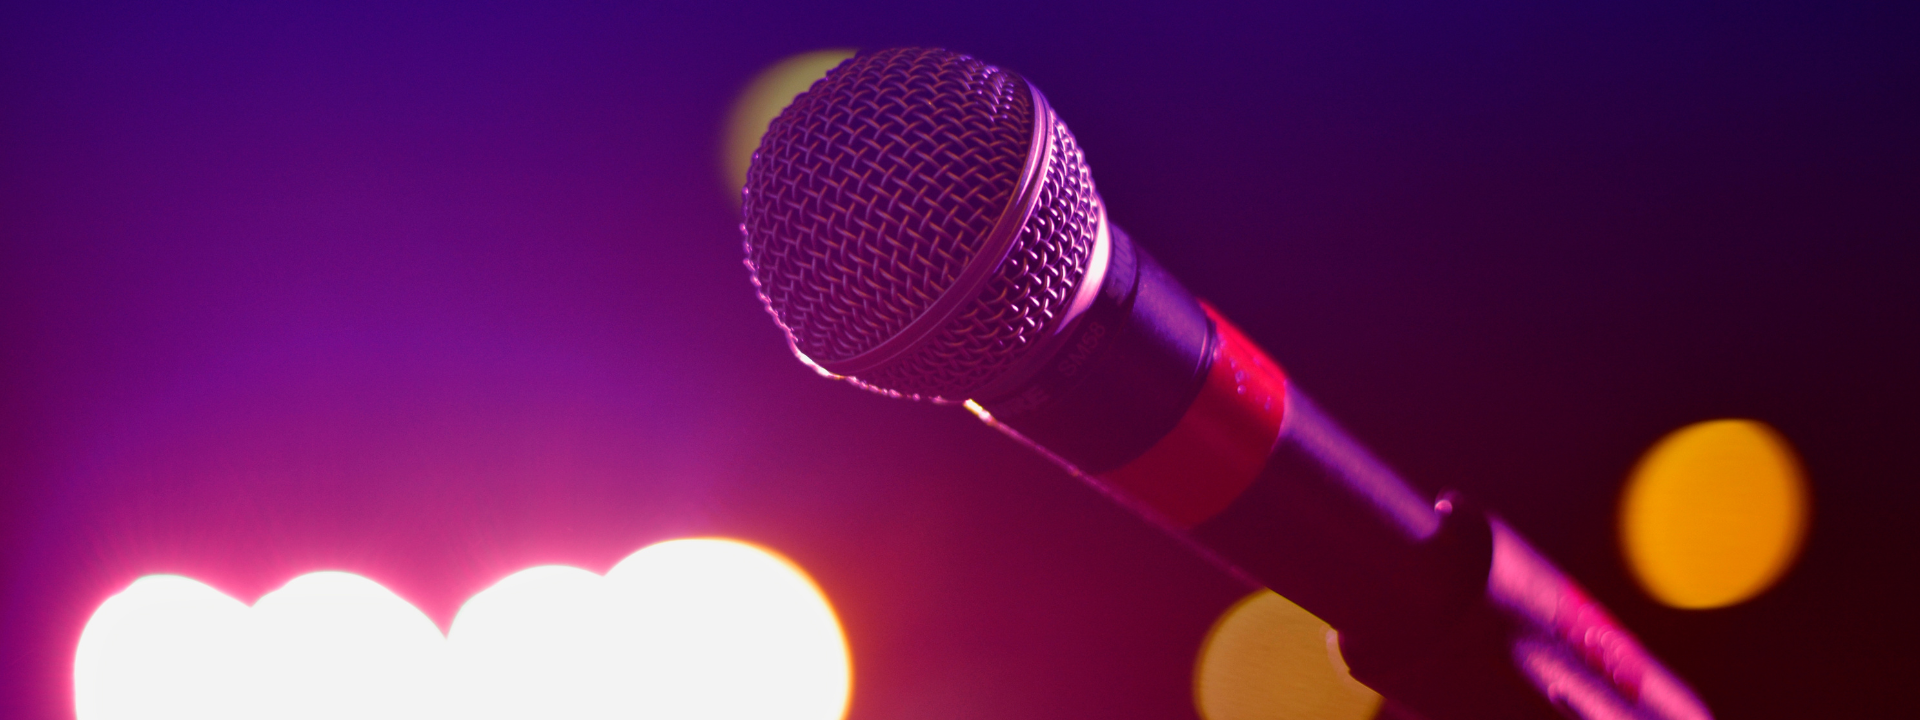 microphone in front of colorful background